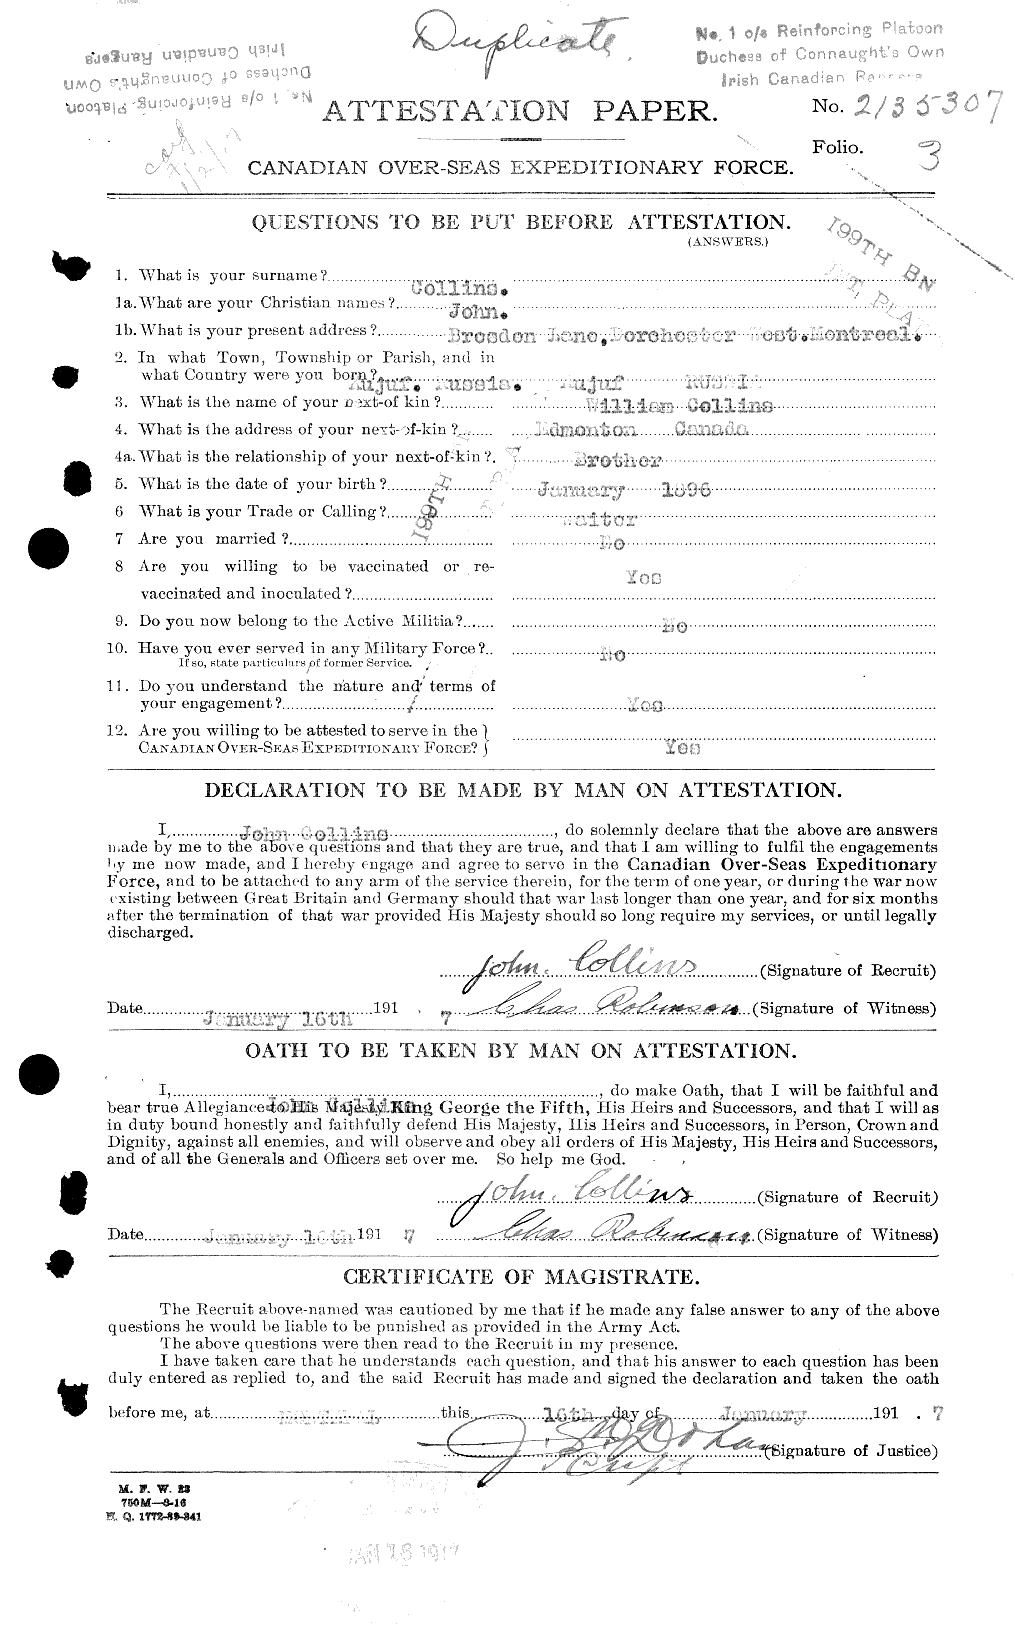 Personnel Records of the First World War - CEF 037992a